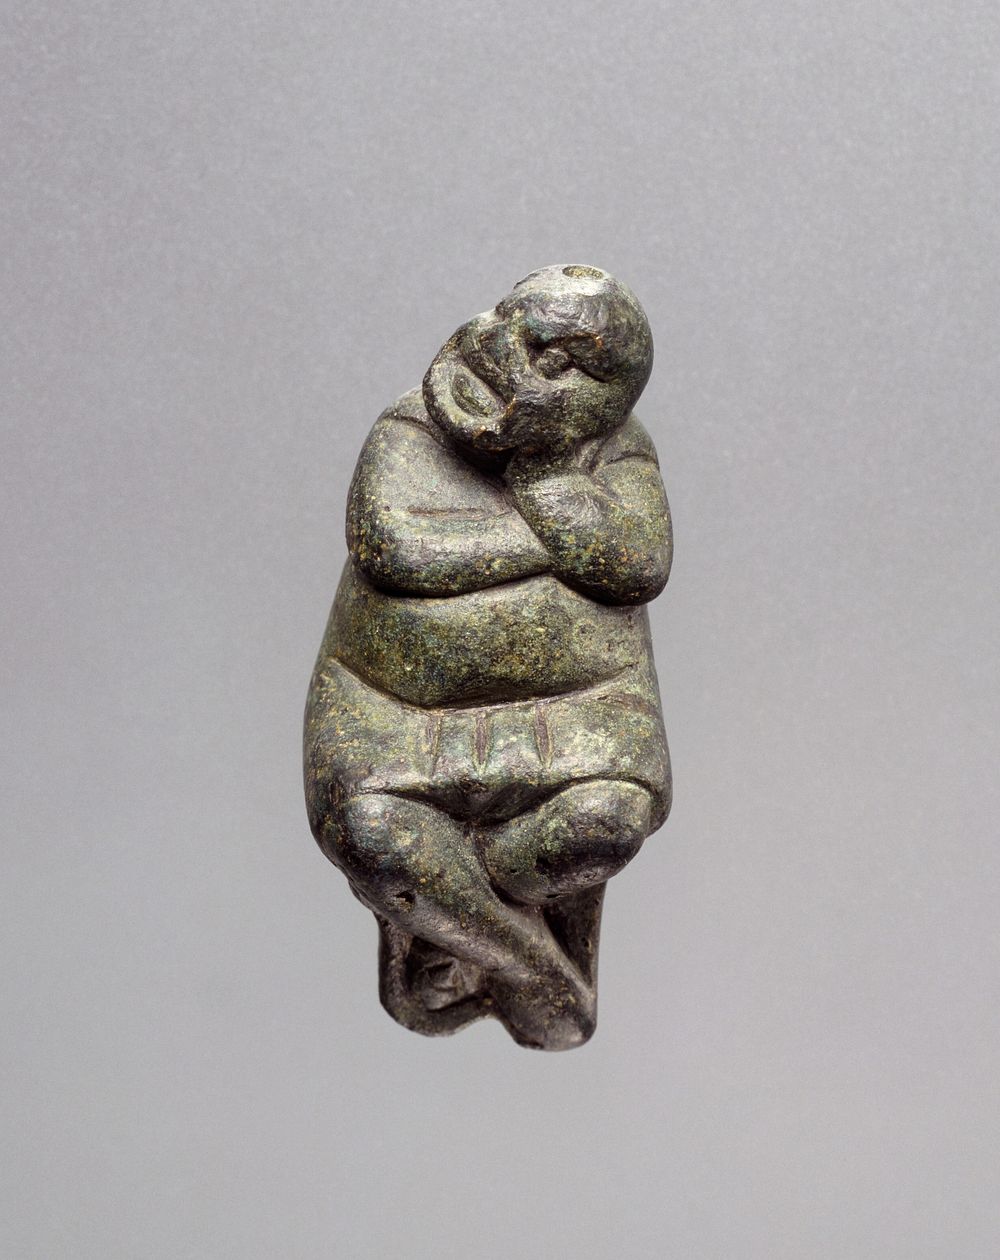 Statuette of a Seated Actor